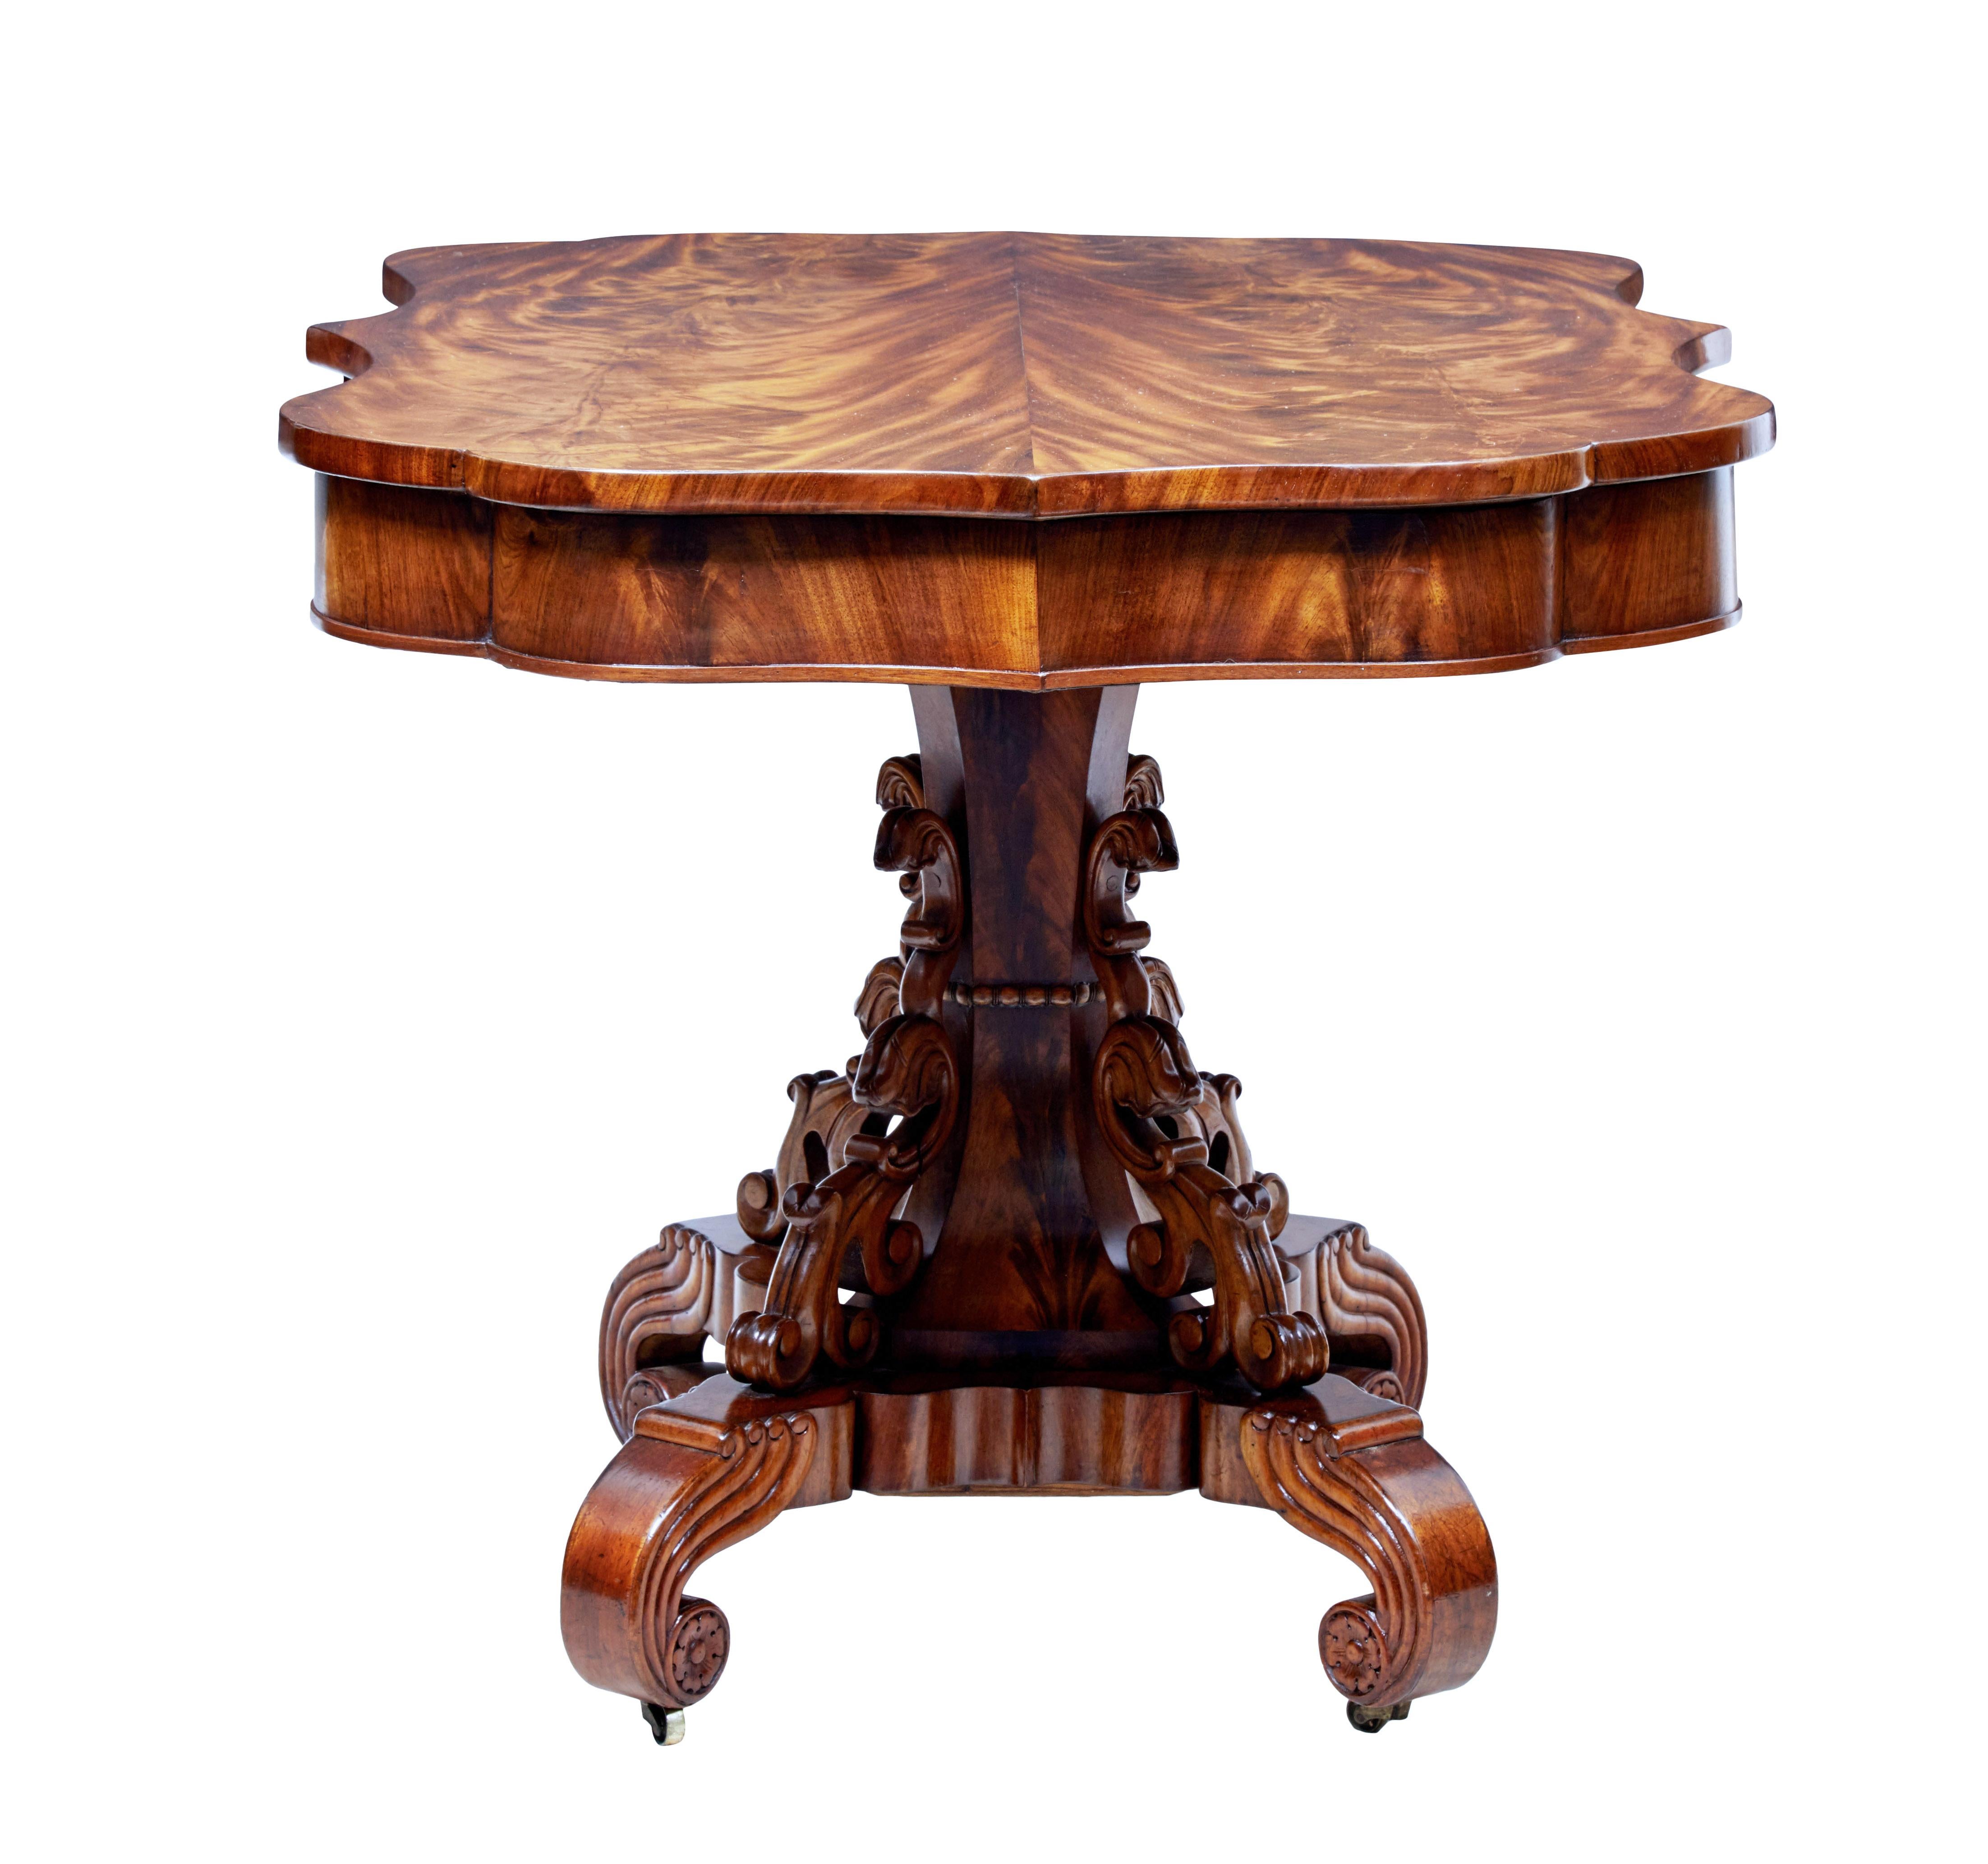 Stunning mid-19th century Danish mahogany centre table, circa 1860.

Beautifully shaped top surface with striking half matching veneer top. Standing on a fluted stem with applied pierced carvings. Standing on a quadriform shaped base and carved